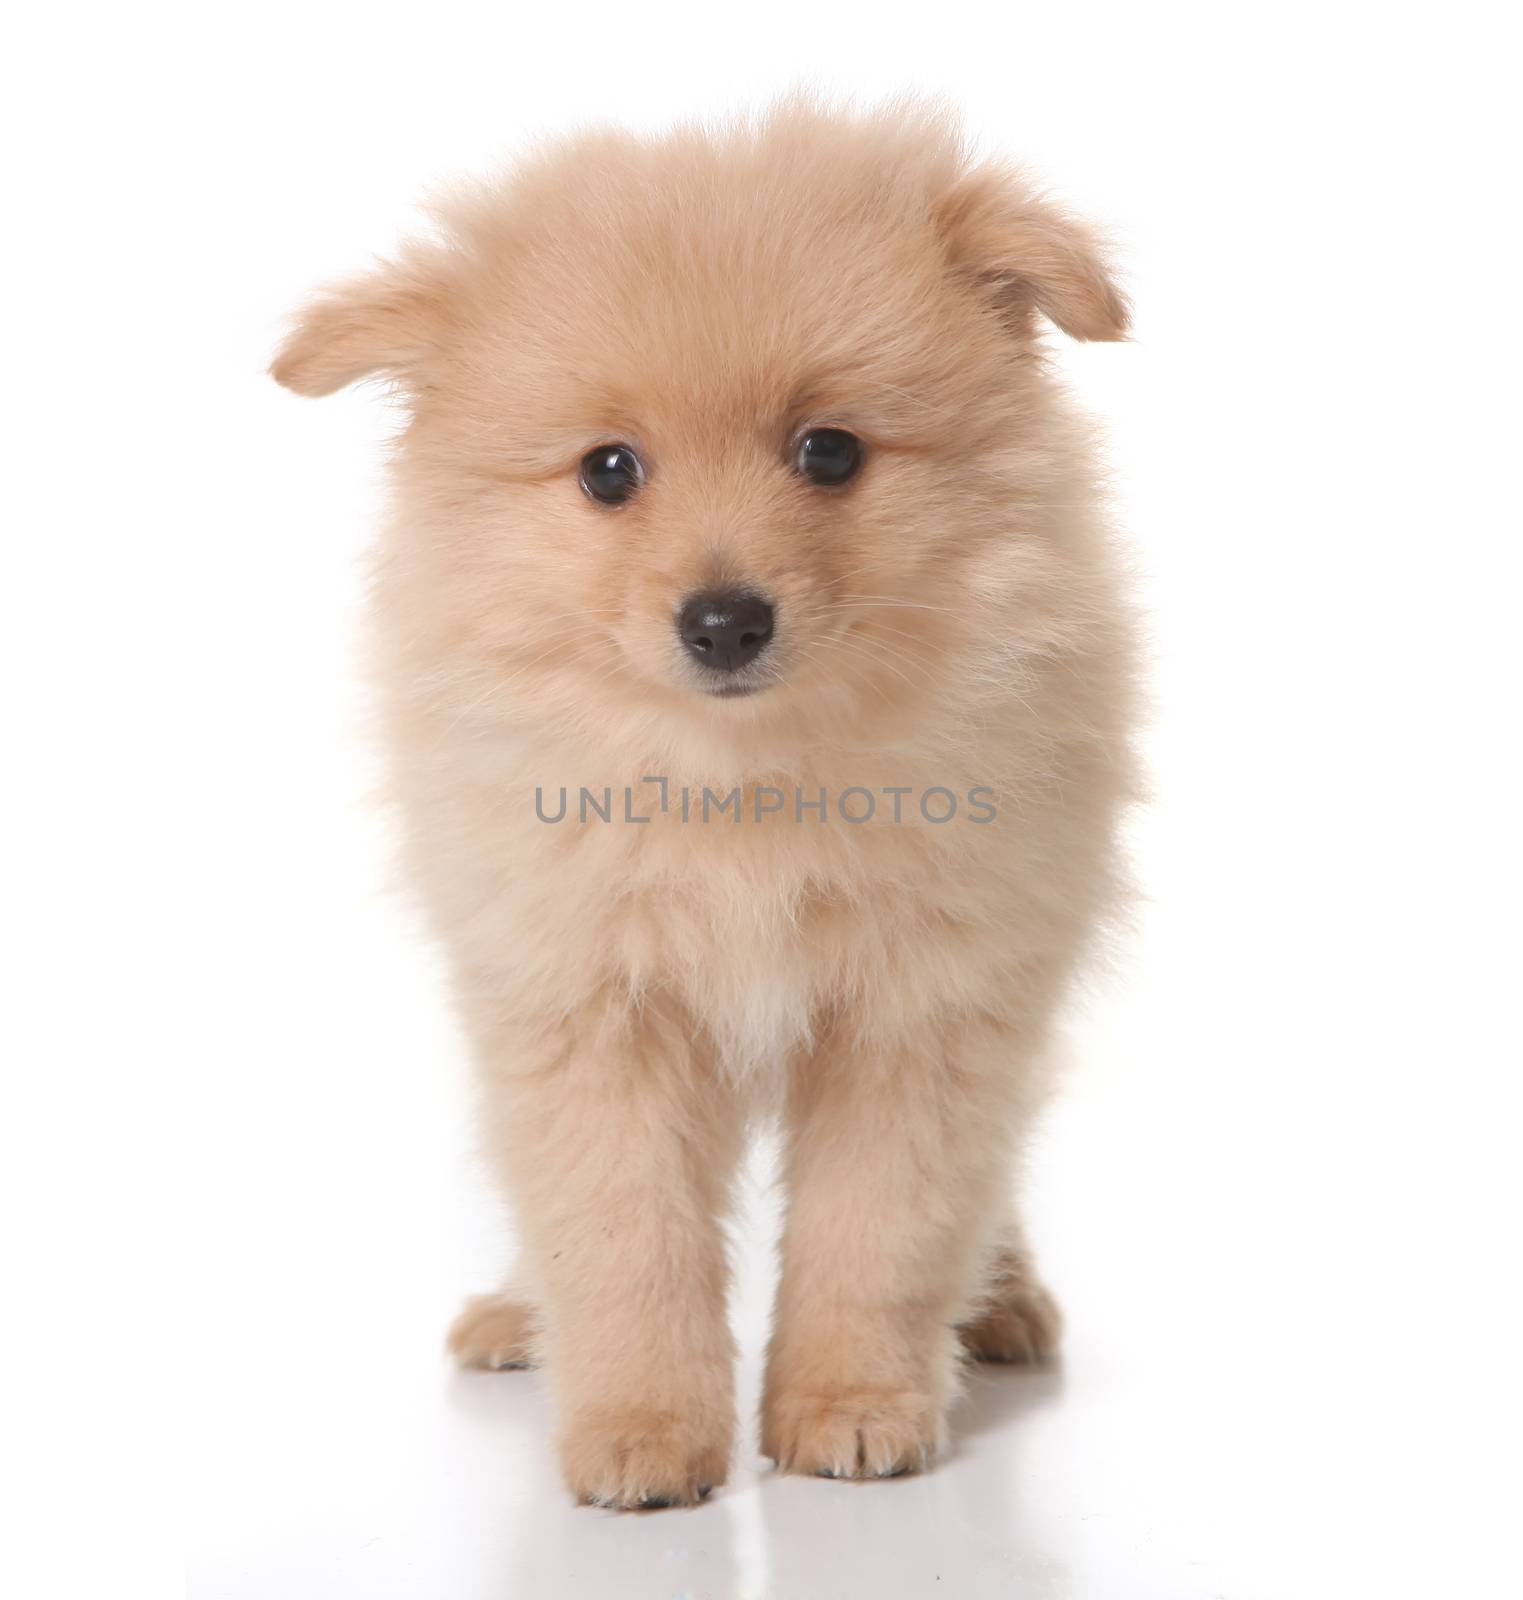 Sweet Tan Colored Pomeranian Puppy on White Background With Droopy Eyes